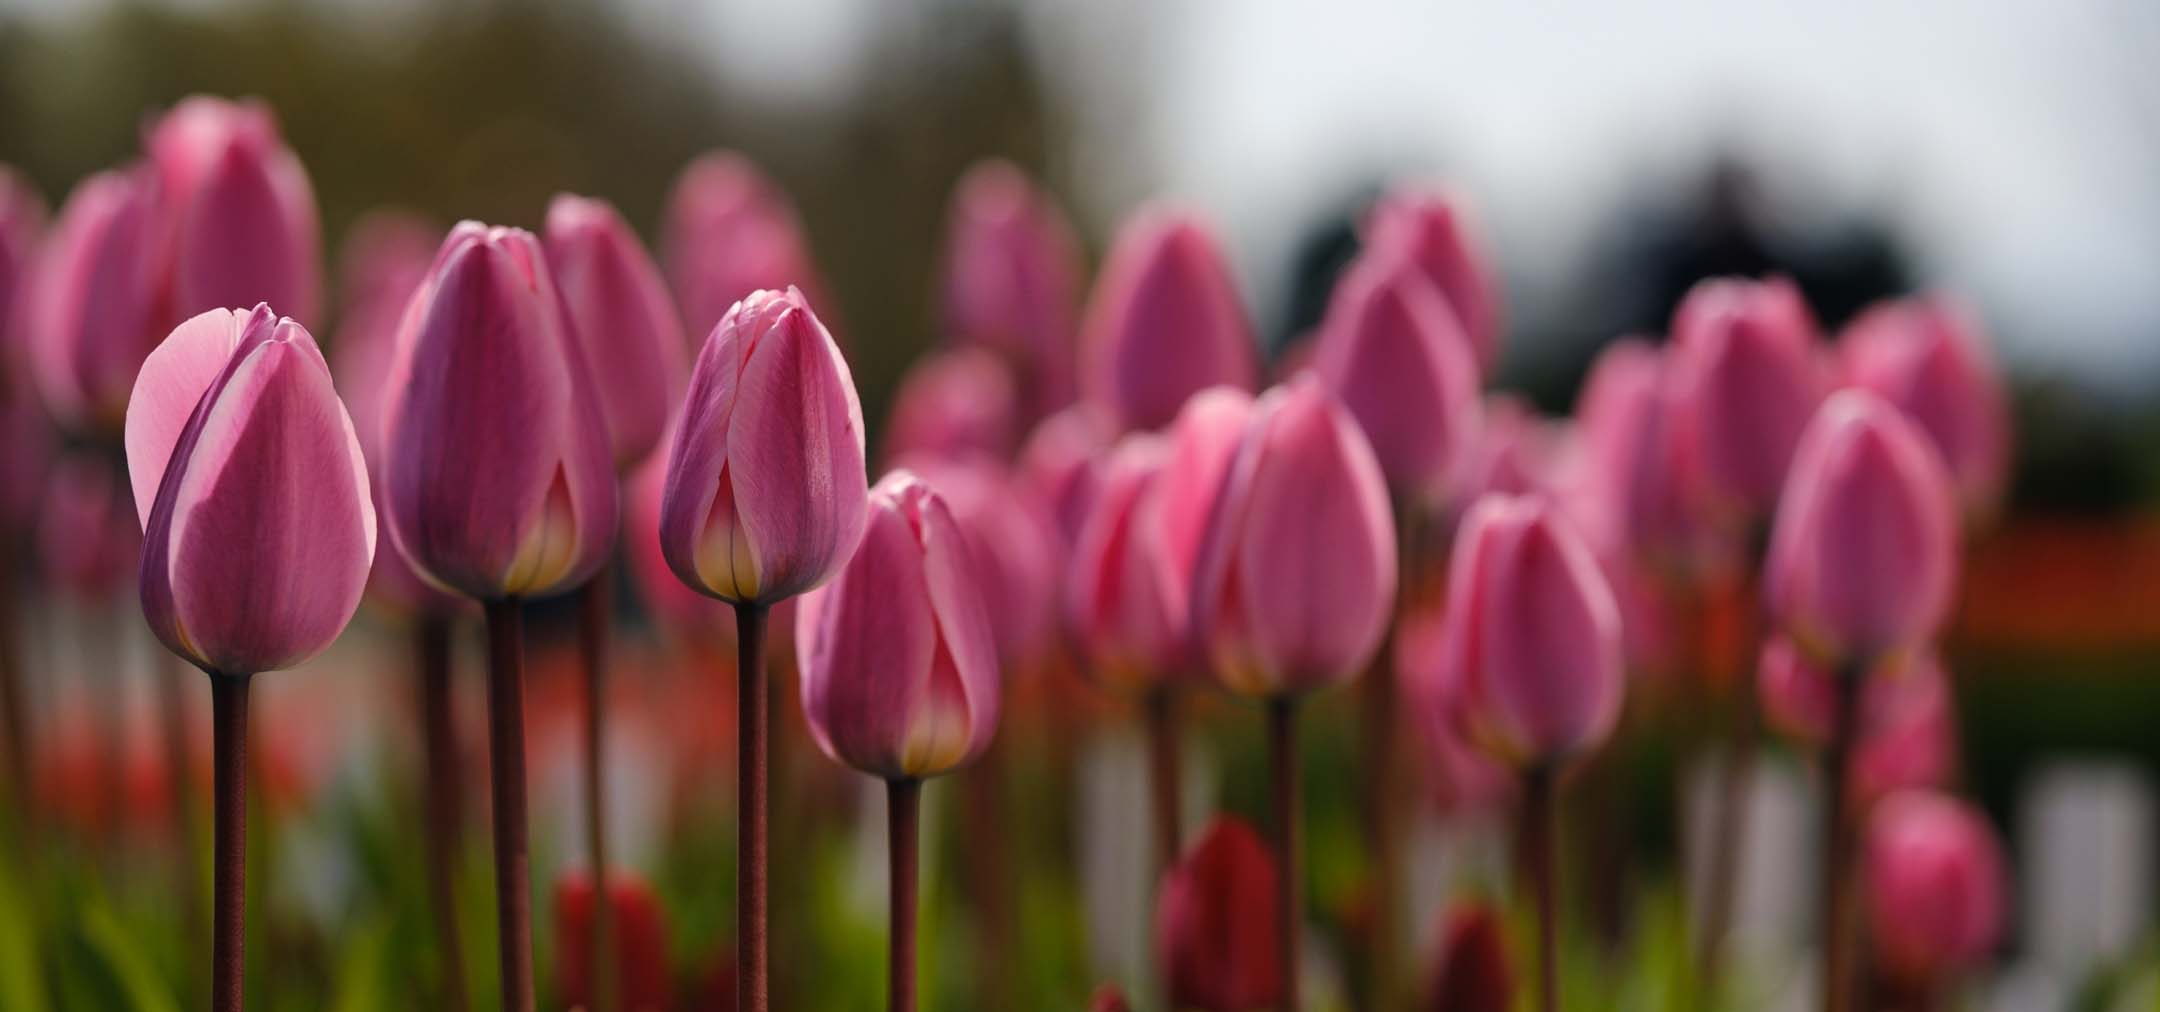 Rows of pink tulips.